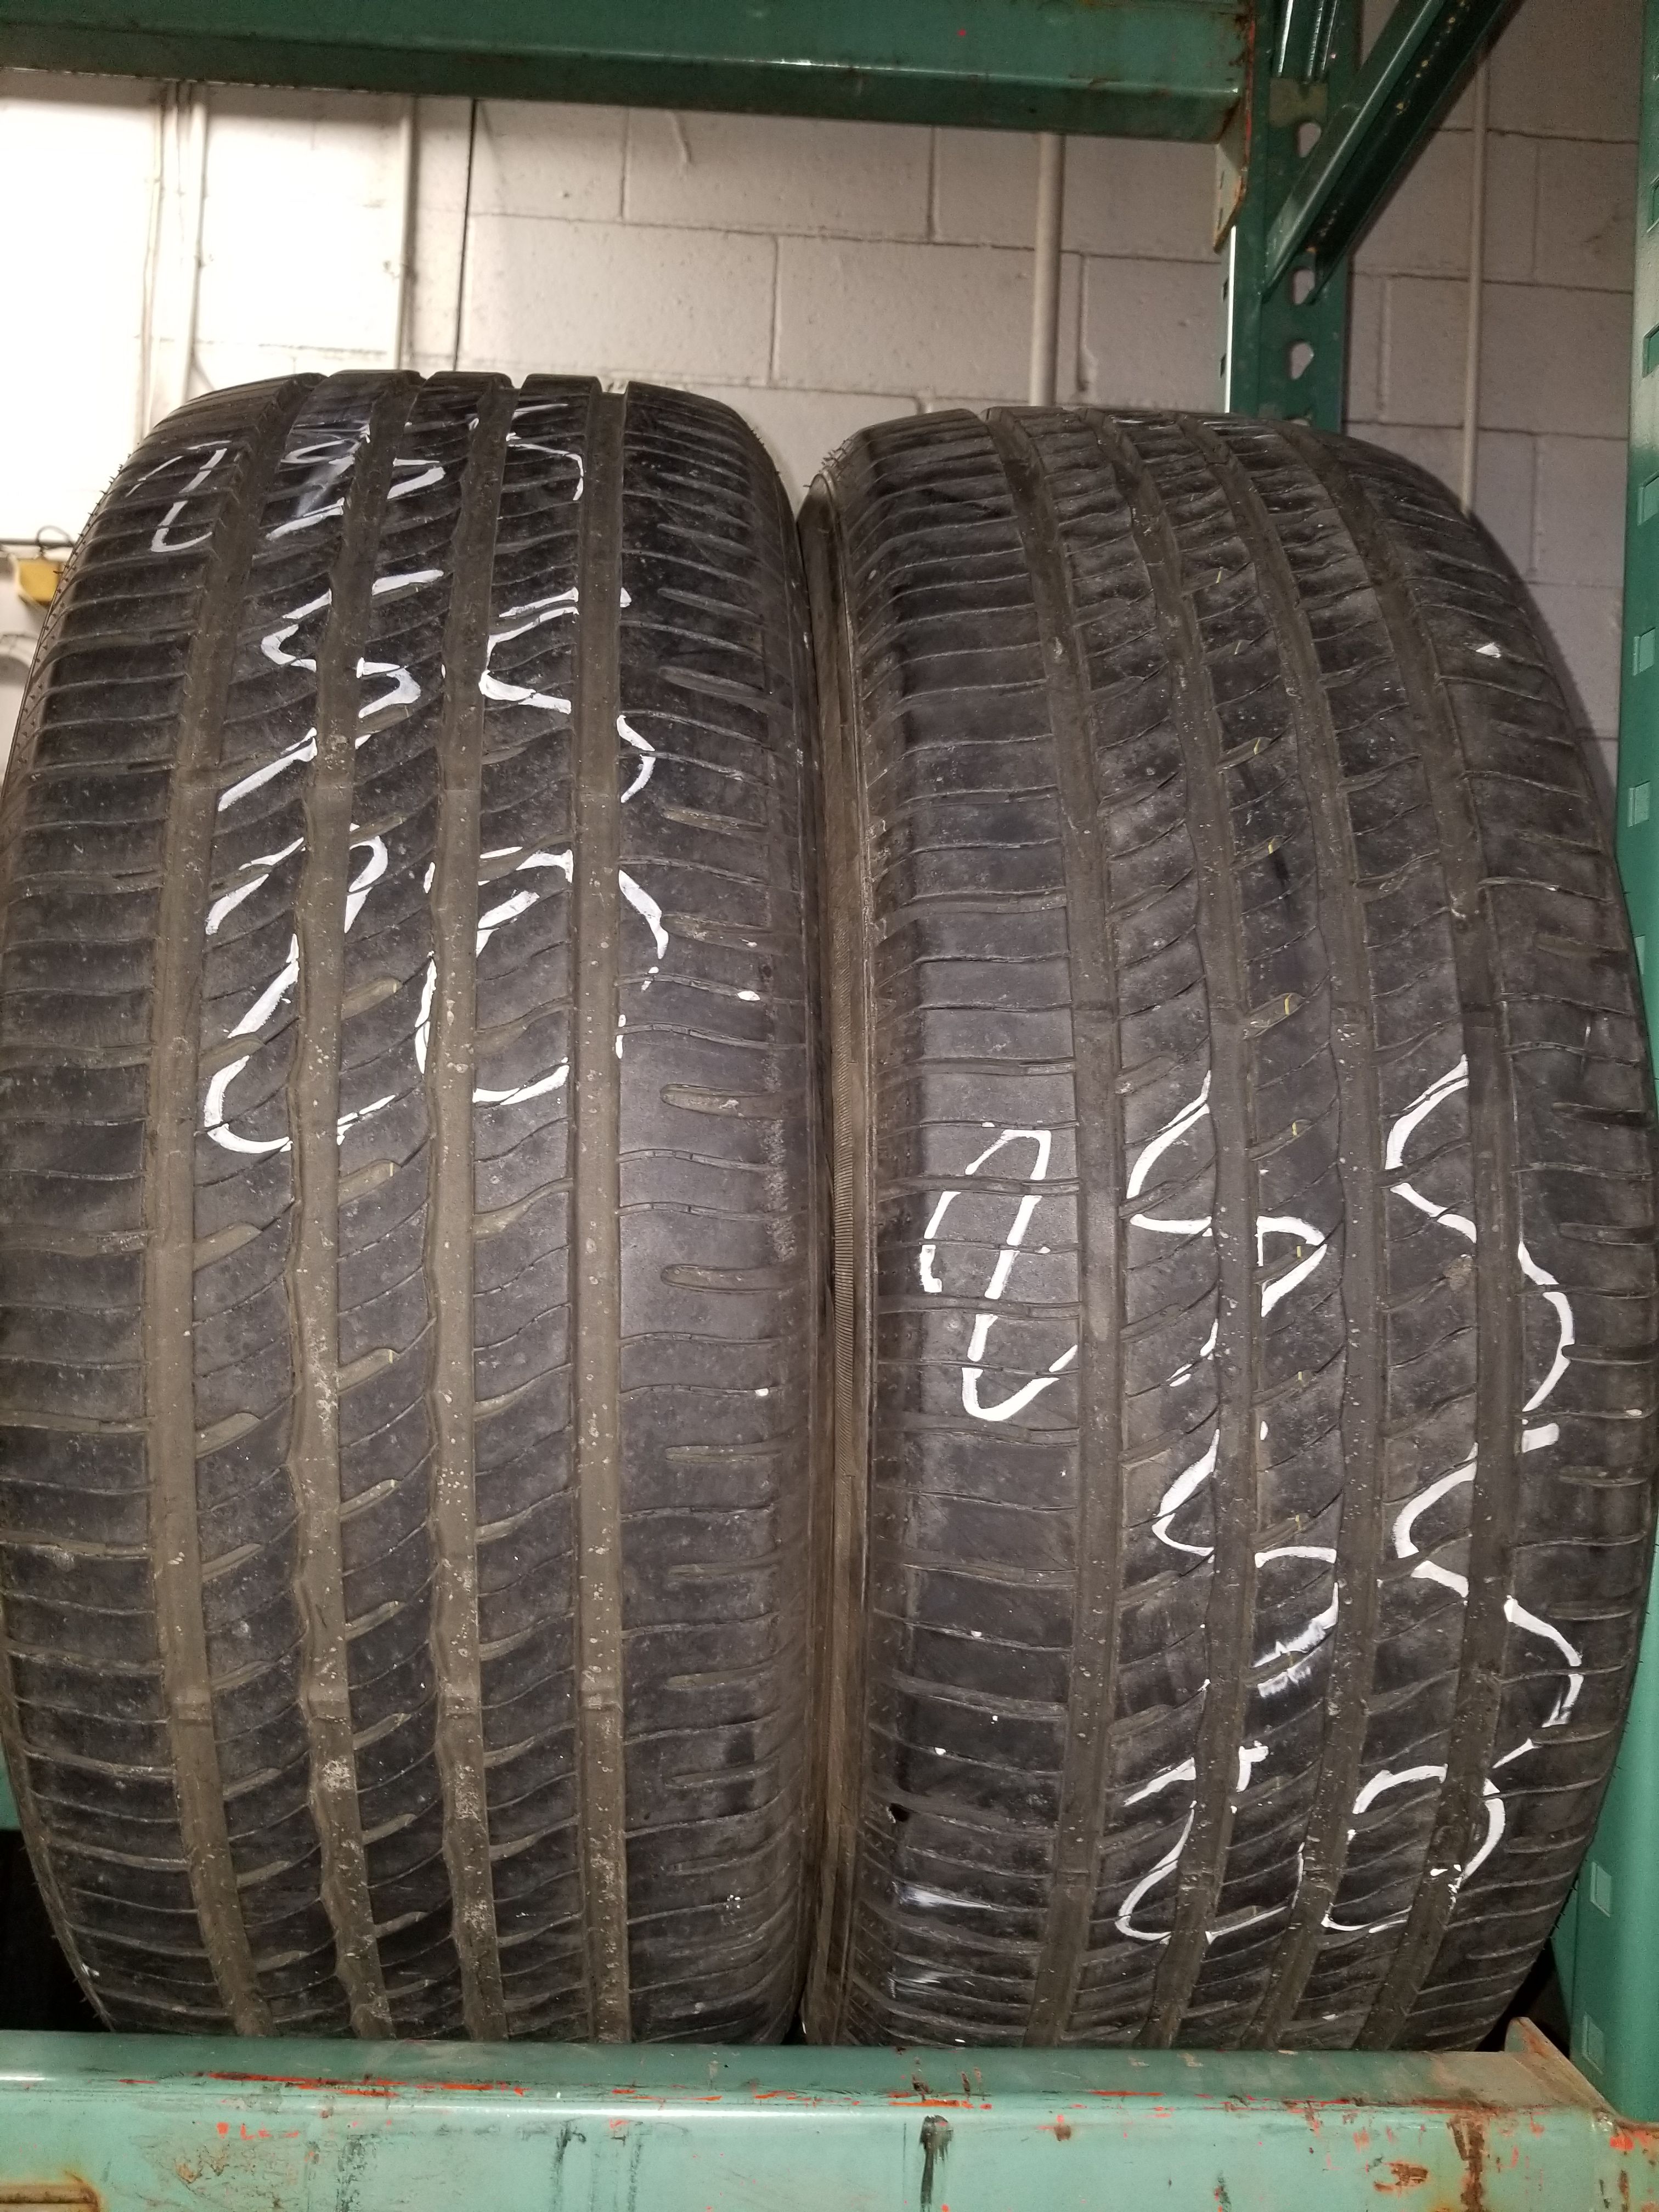 2 used like new 255/55R20 NEXEN tires with more than 85% tread on them.